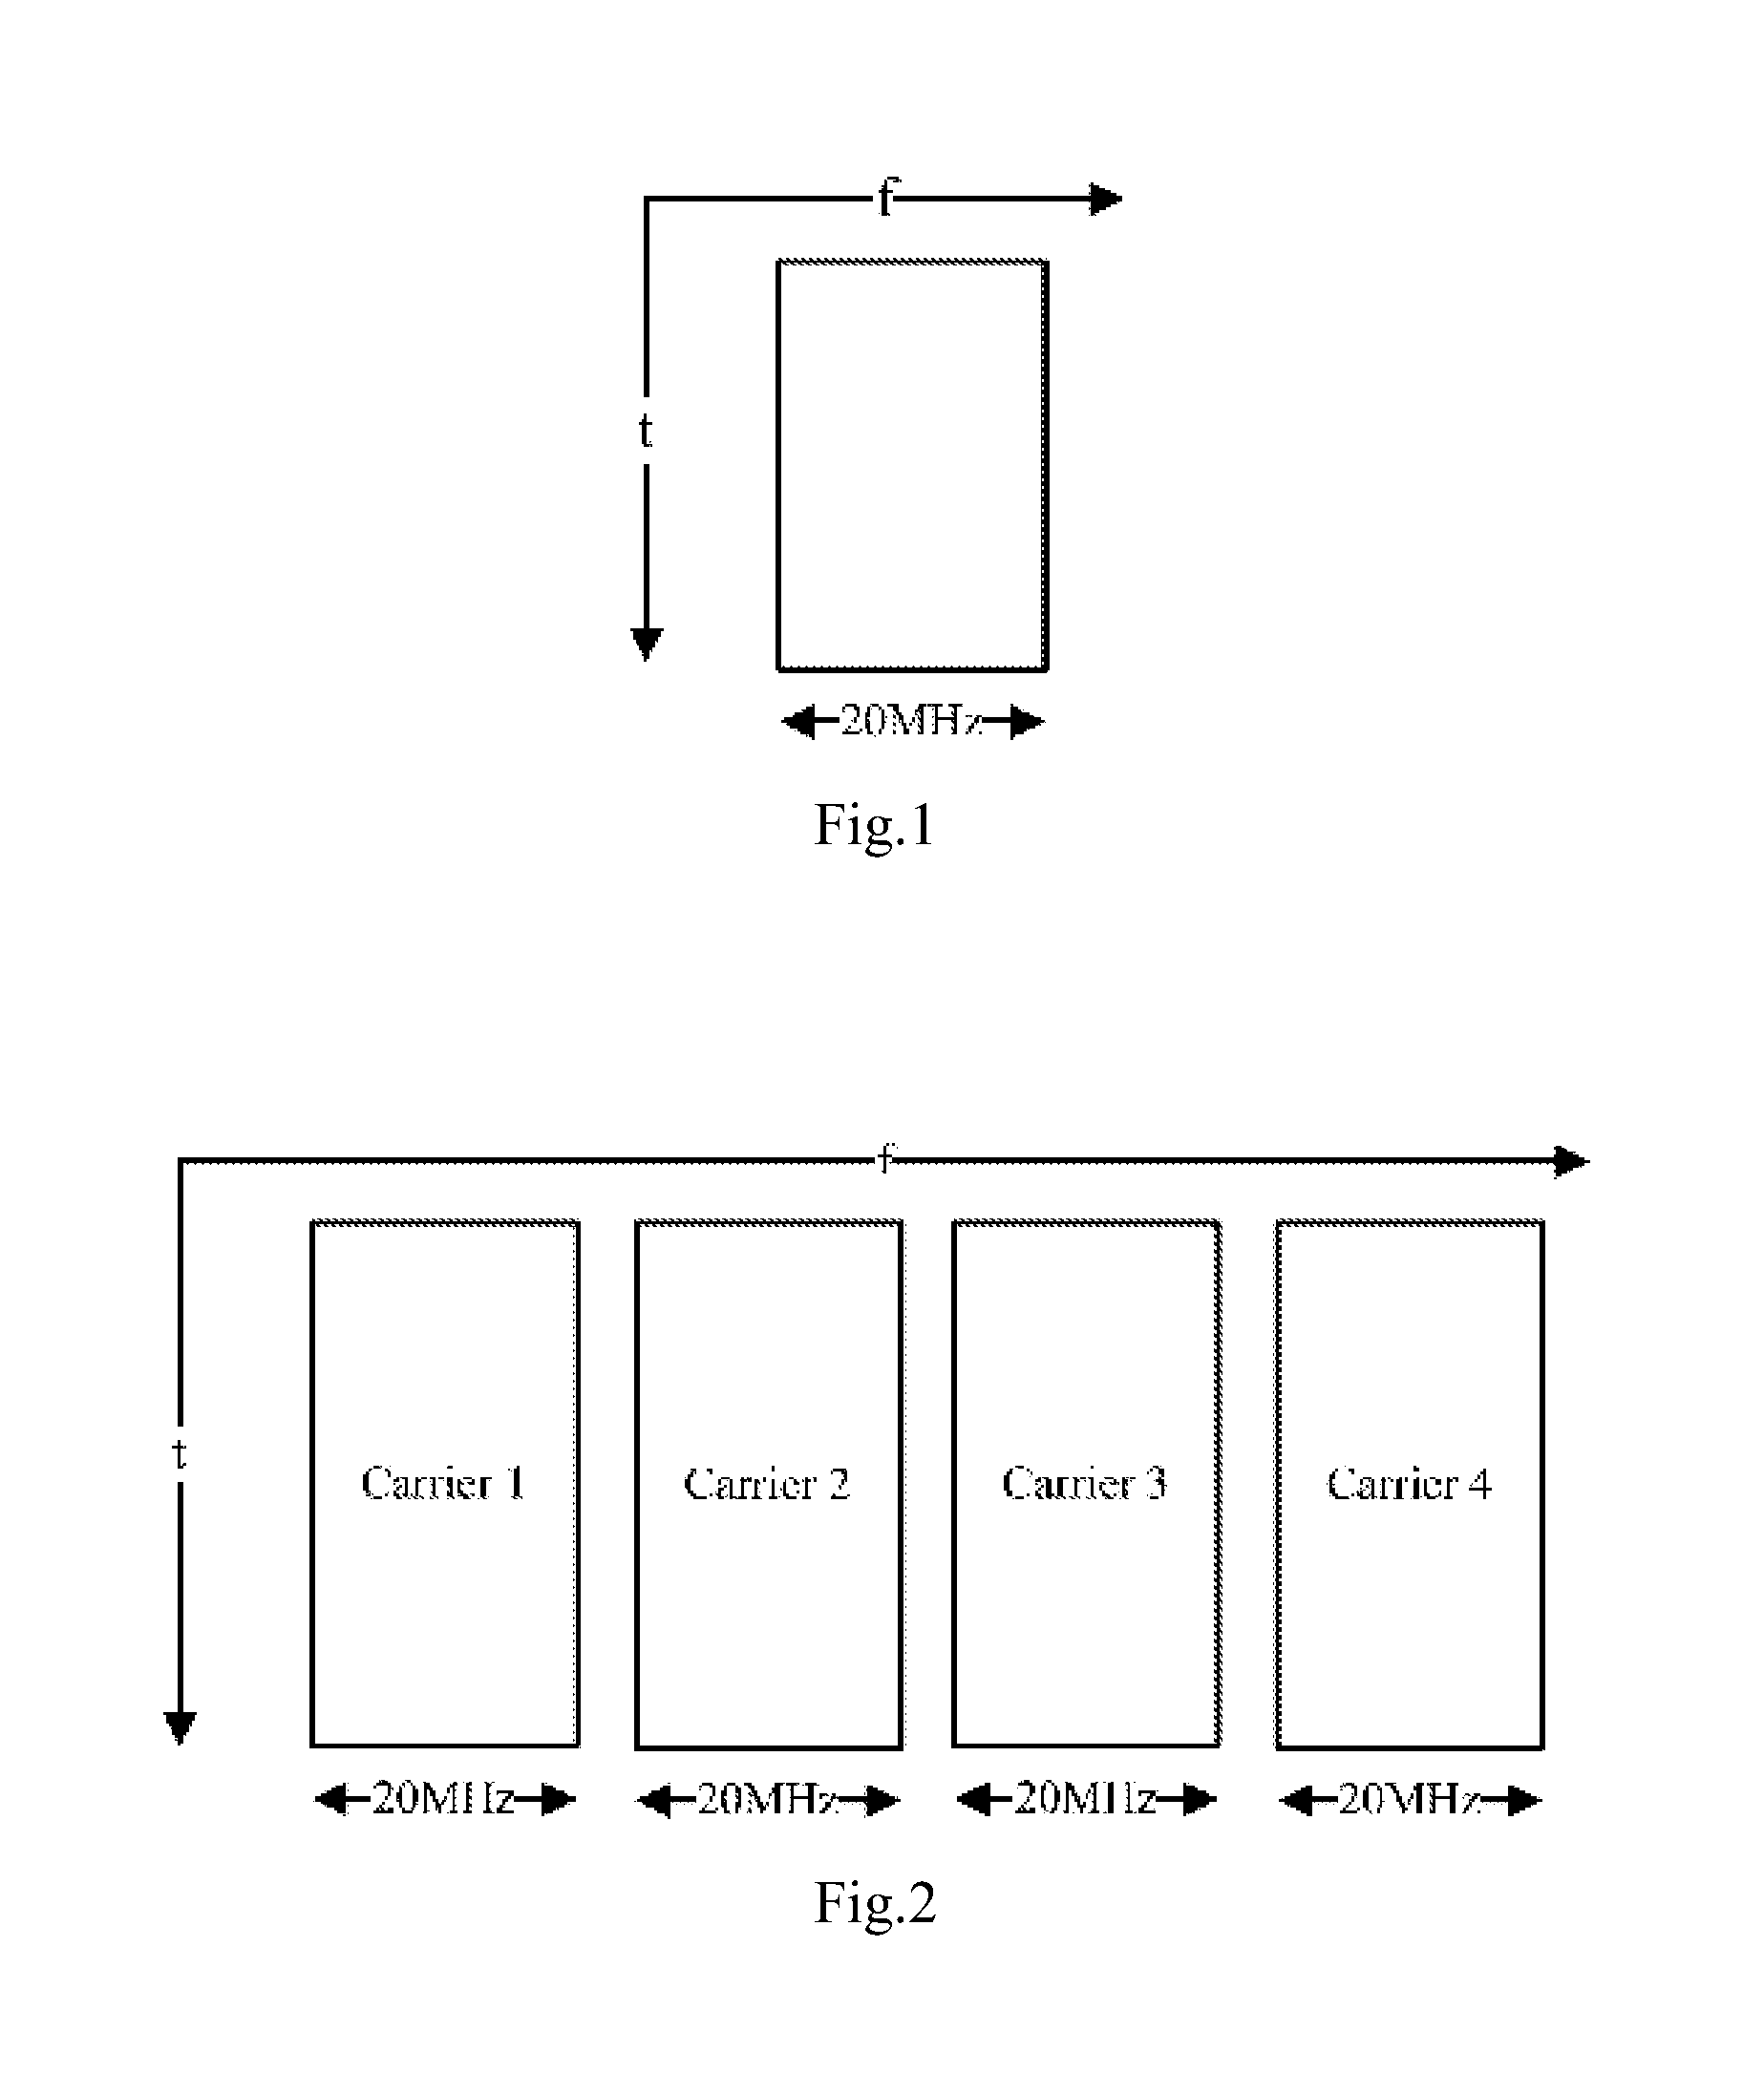 Downlink control signalling transmission method and device